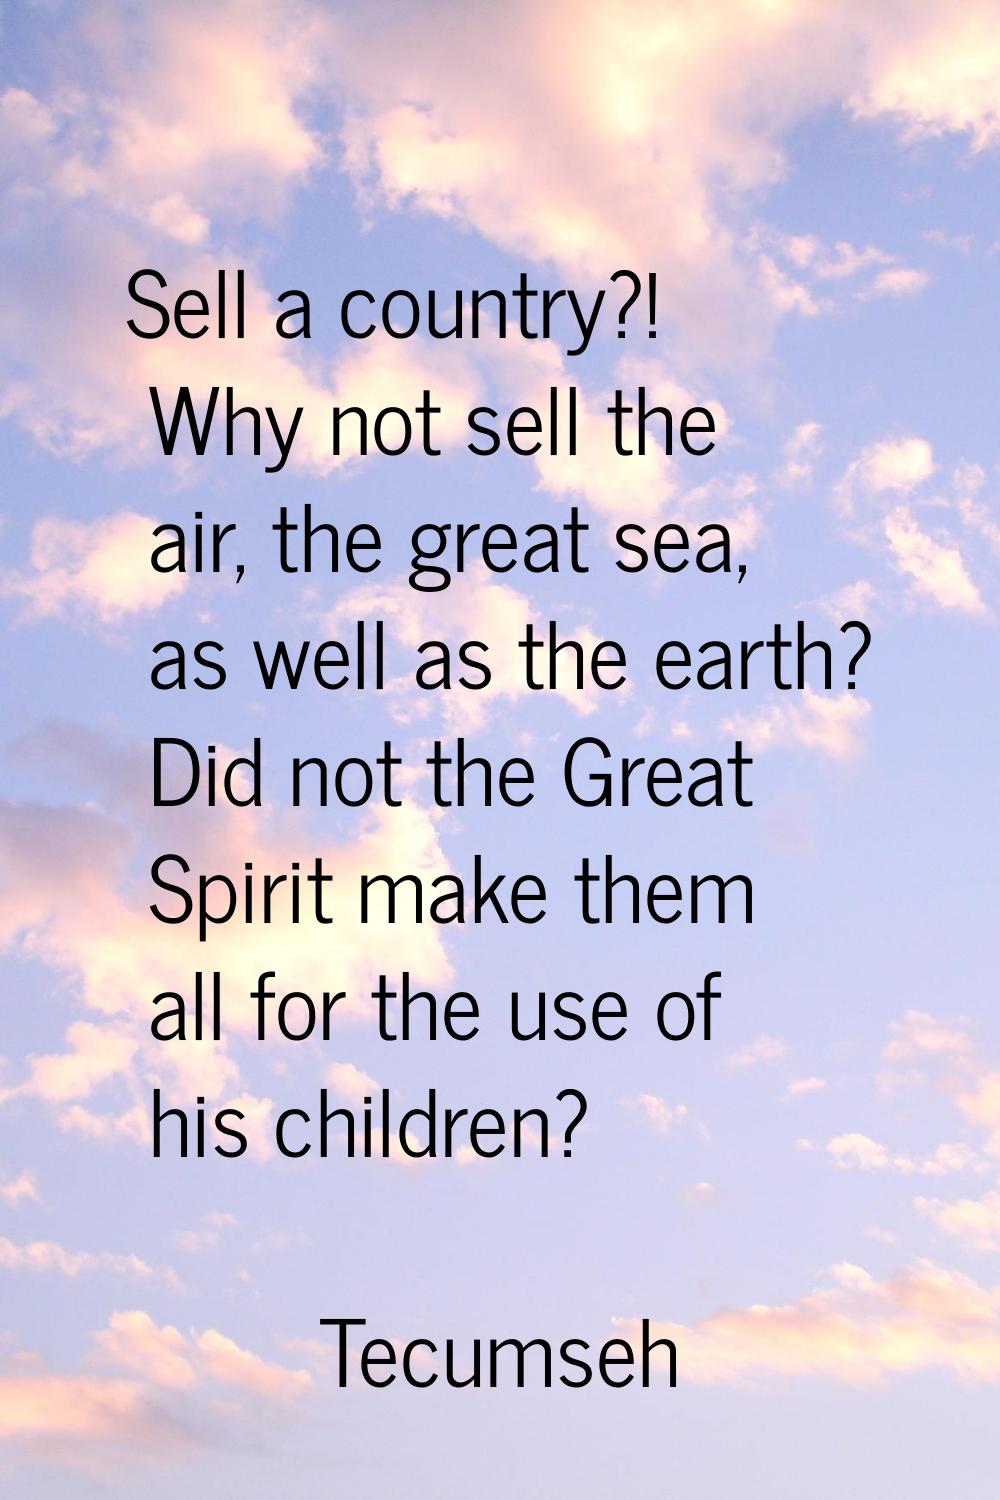 Sell a country?! Why not sell the air, the great sea, as well as the earth? Did not the Great Spiri